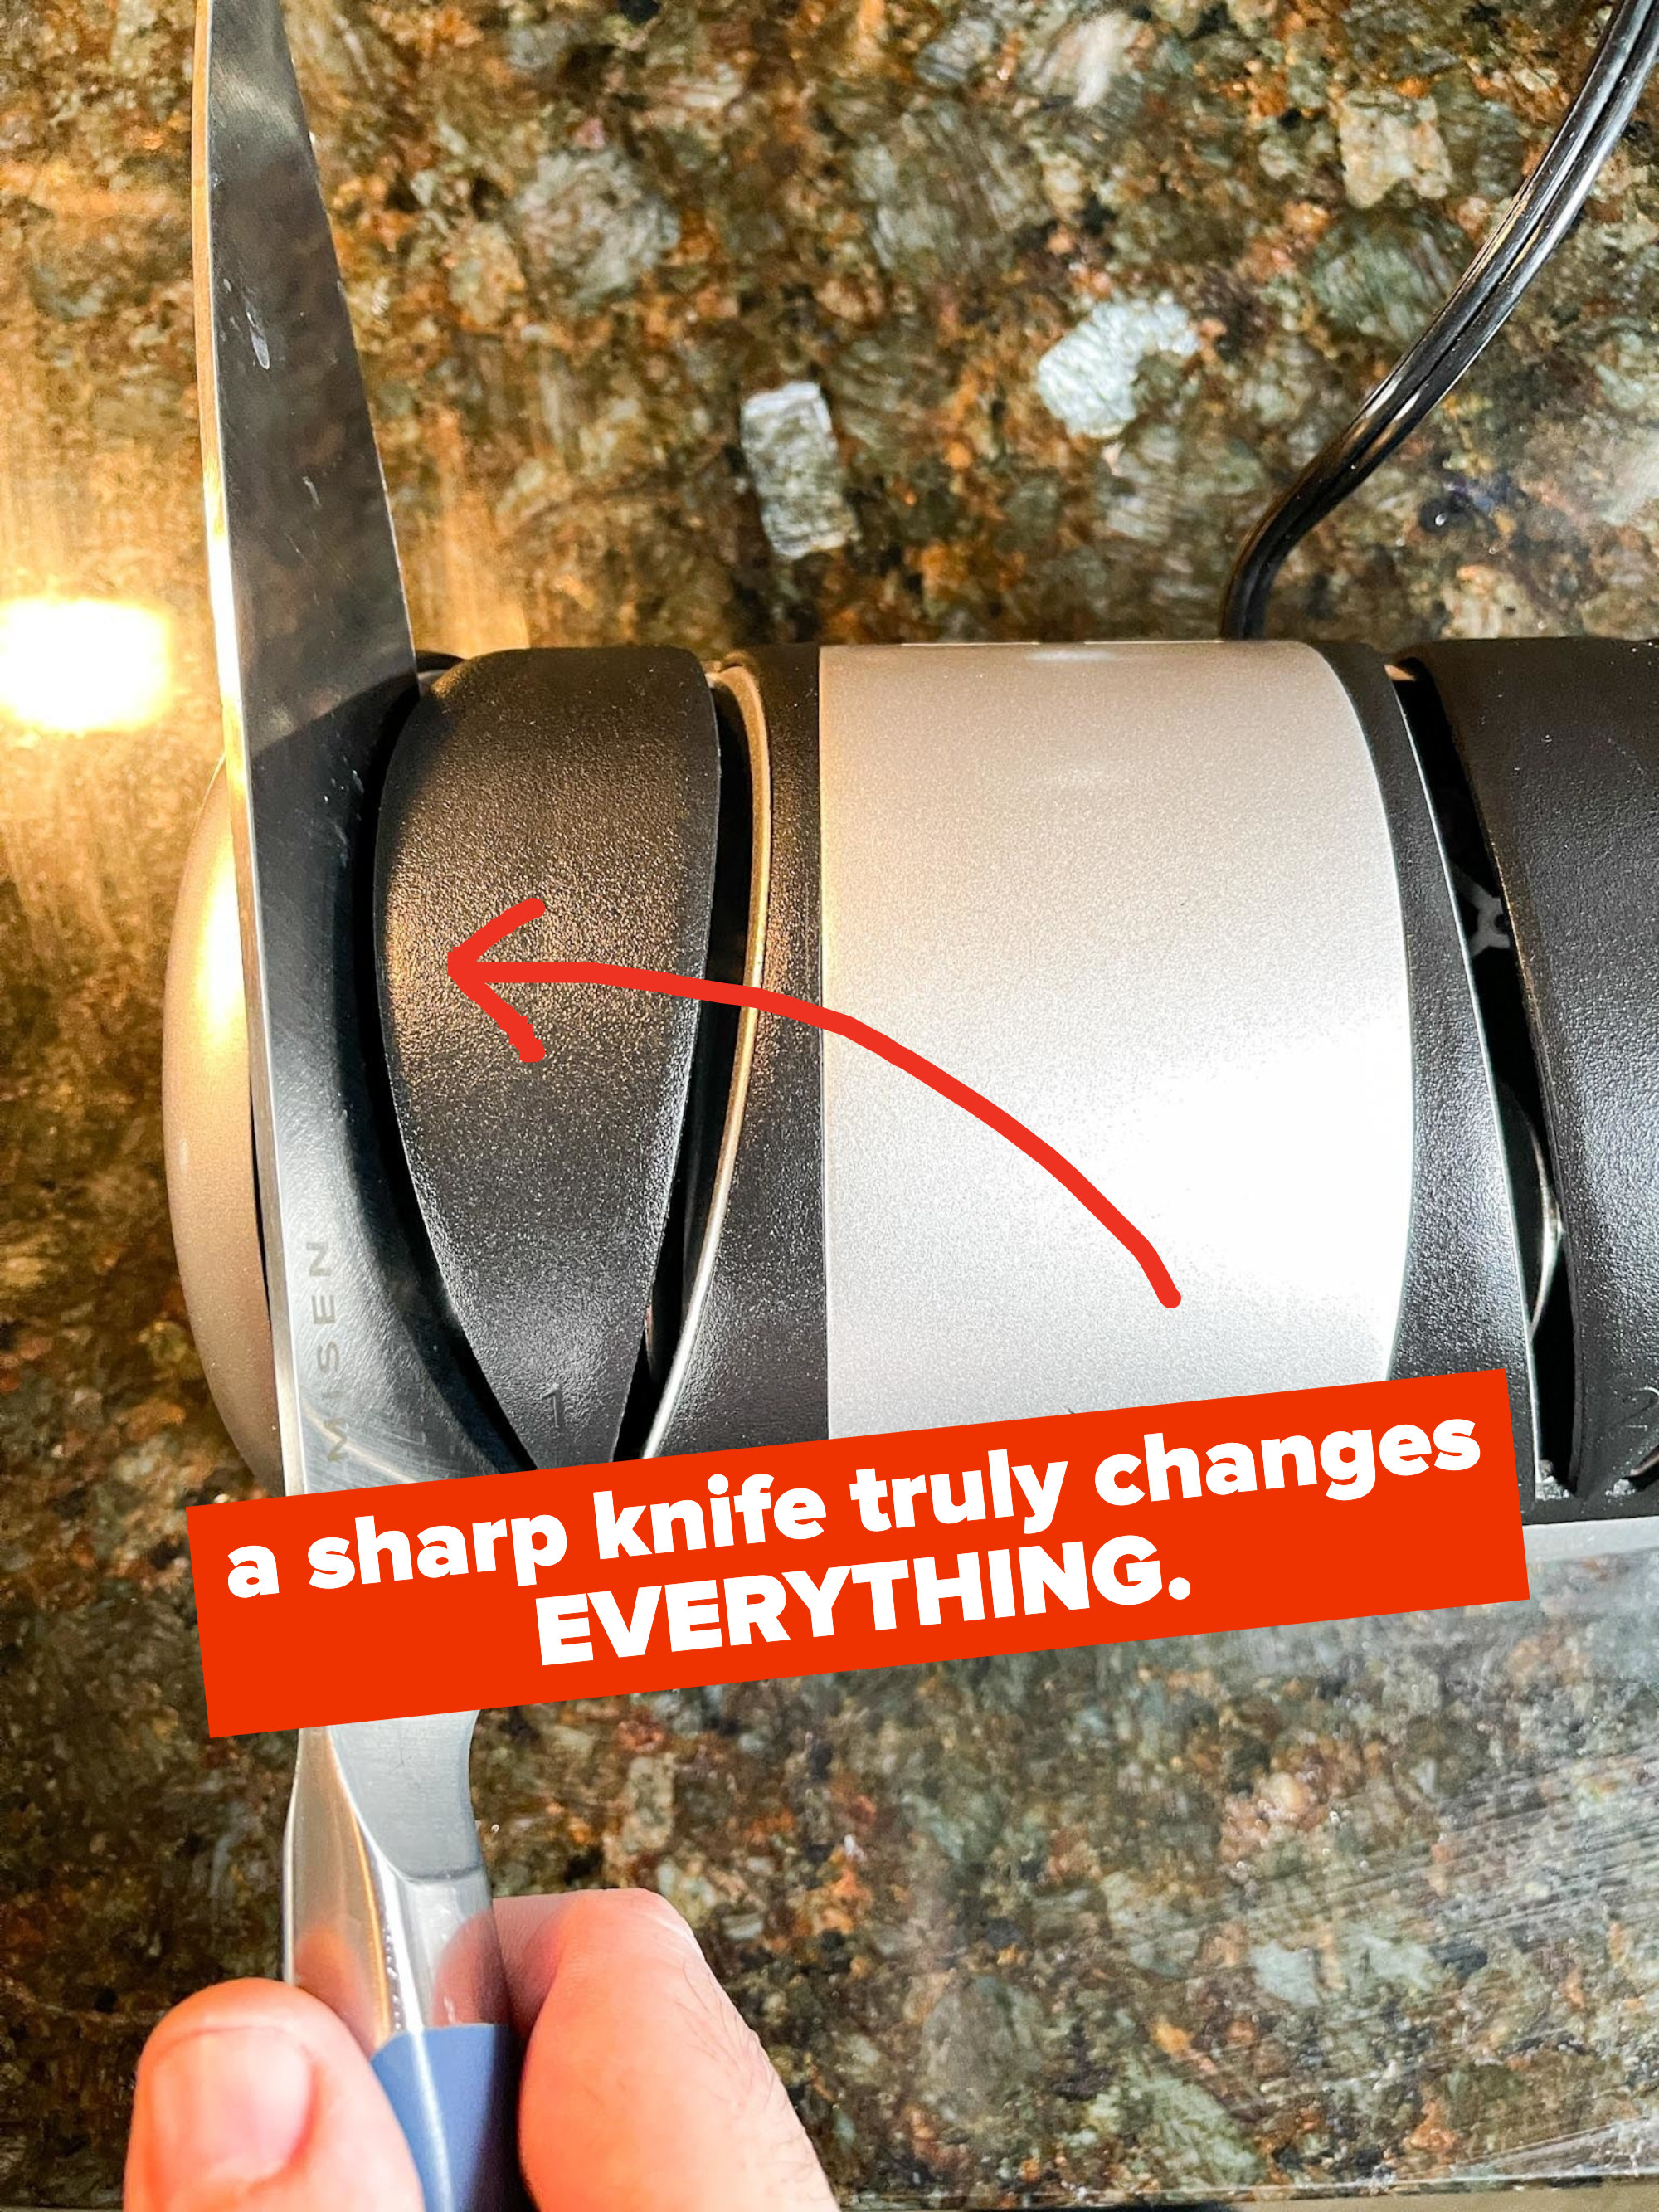 Sharpening a knife in an electronic knife sharpener